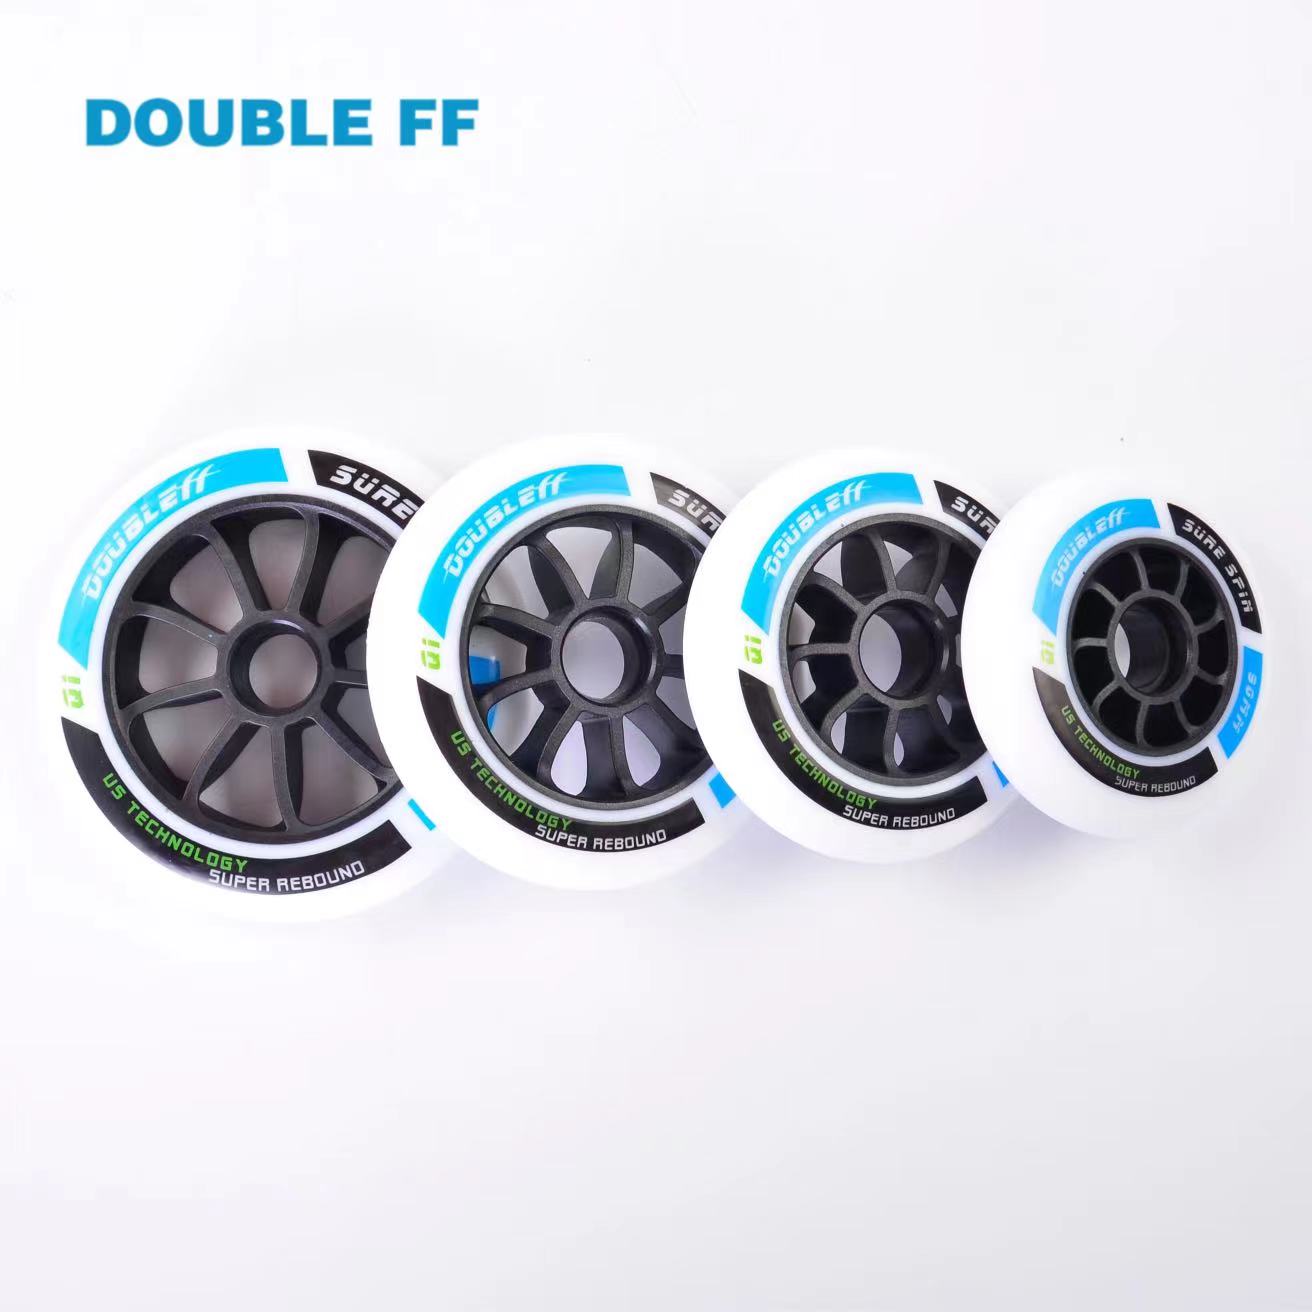 Double FF Professional Speed Skate Wheel 85A High Resilience Speed Skate Wheels for training or compitetion